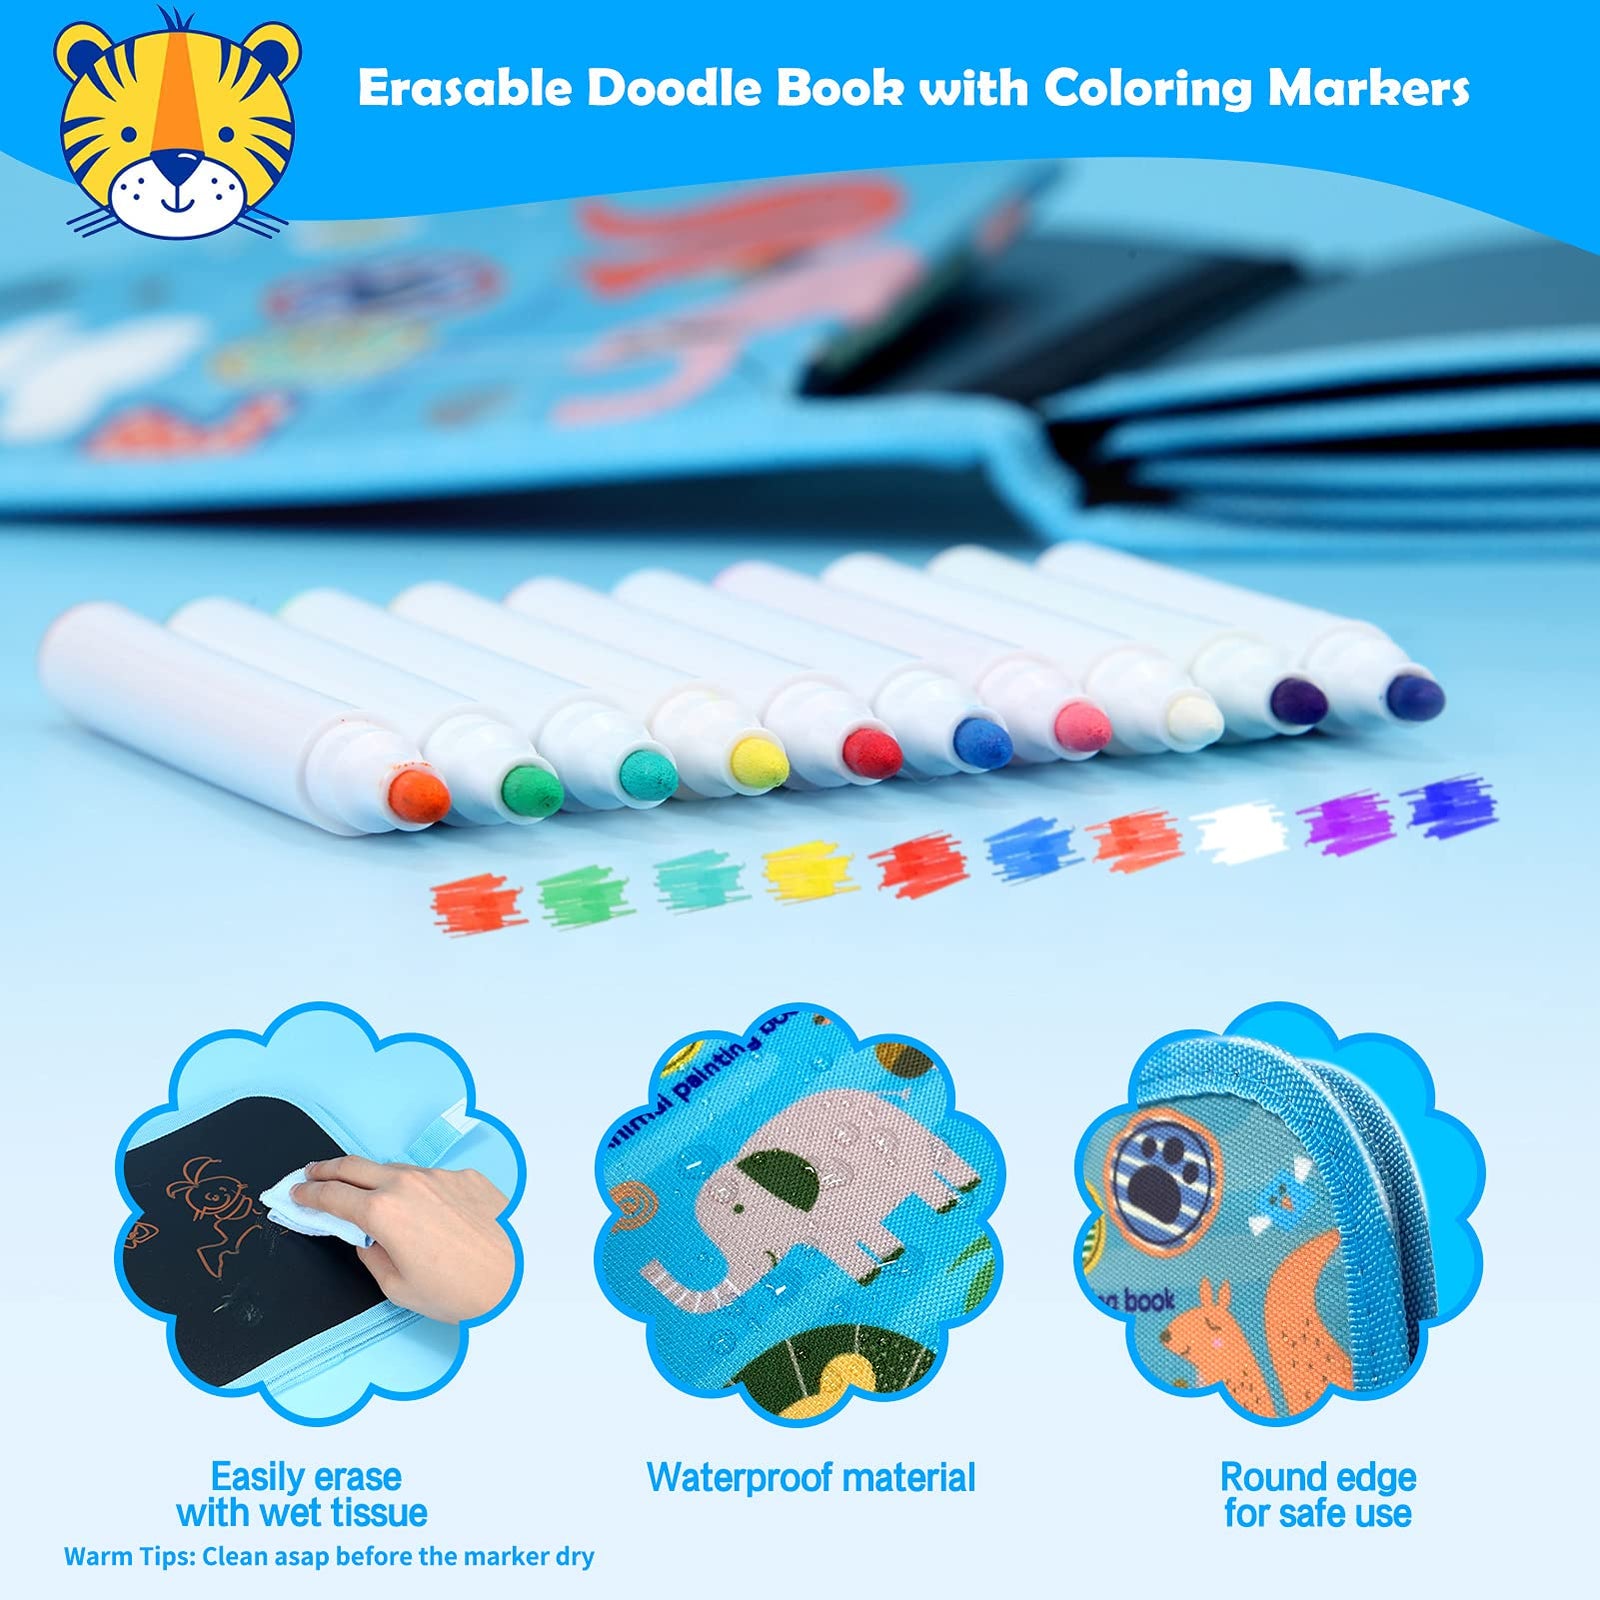 Kids Erasable Doodle Book Set - Toddlers Activity Toys Reusable Drawing Pads, Preschool Travel Art Toy Scribbler Board for Road Trip Car Game Writing Painting Set, Gift for Boys Girls Age 3,4,5,6